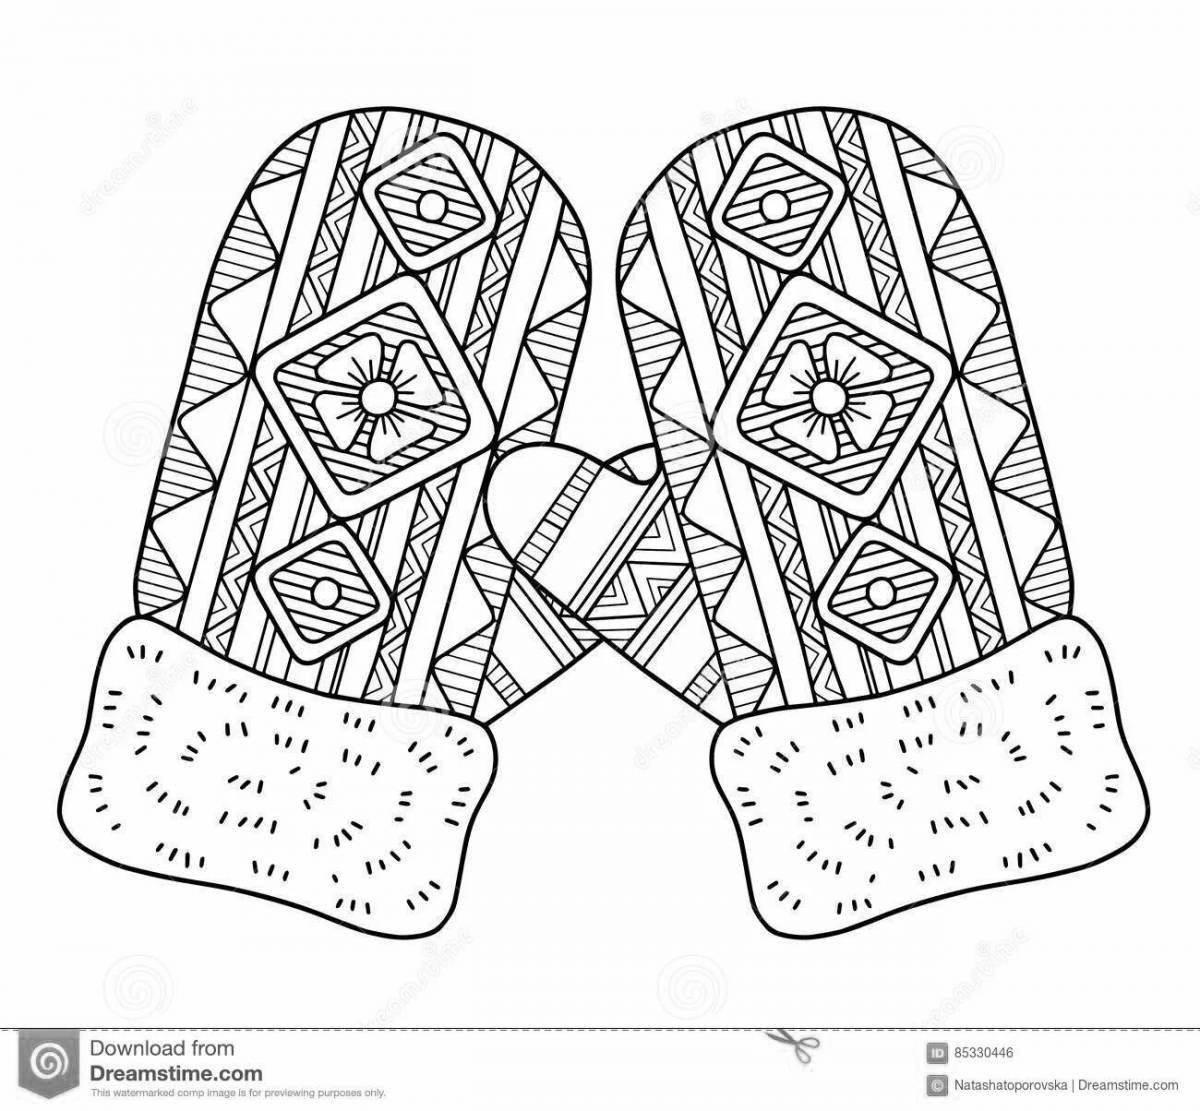 Fun coloring page of rubber mittens